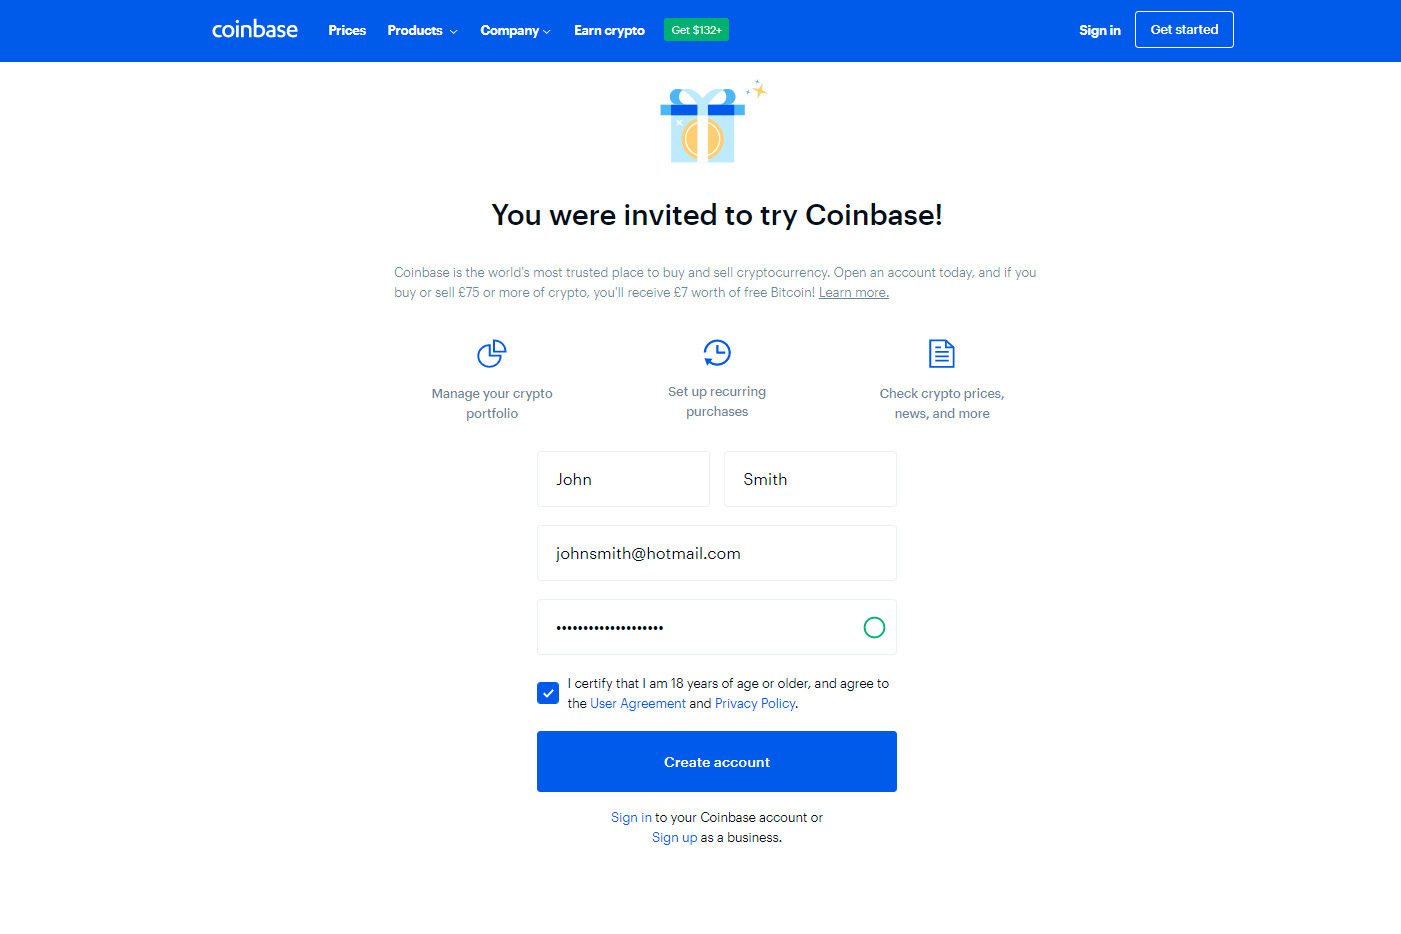 Coinbase Referral Code - Refer Your Friends